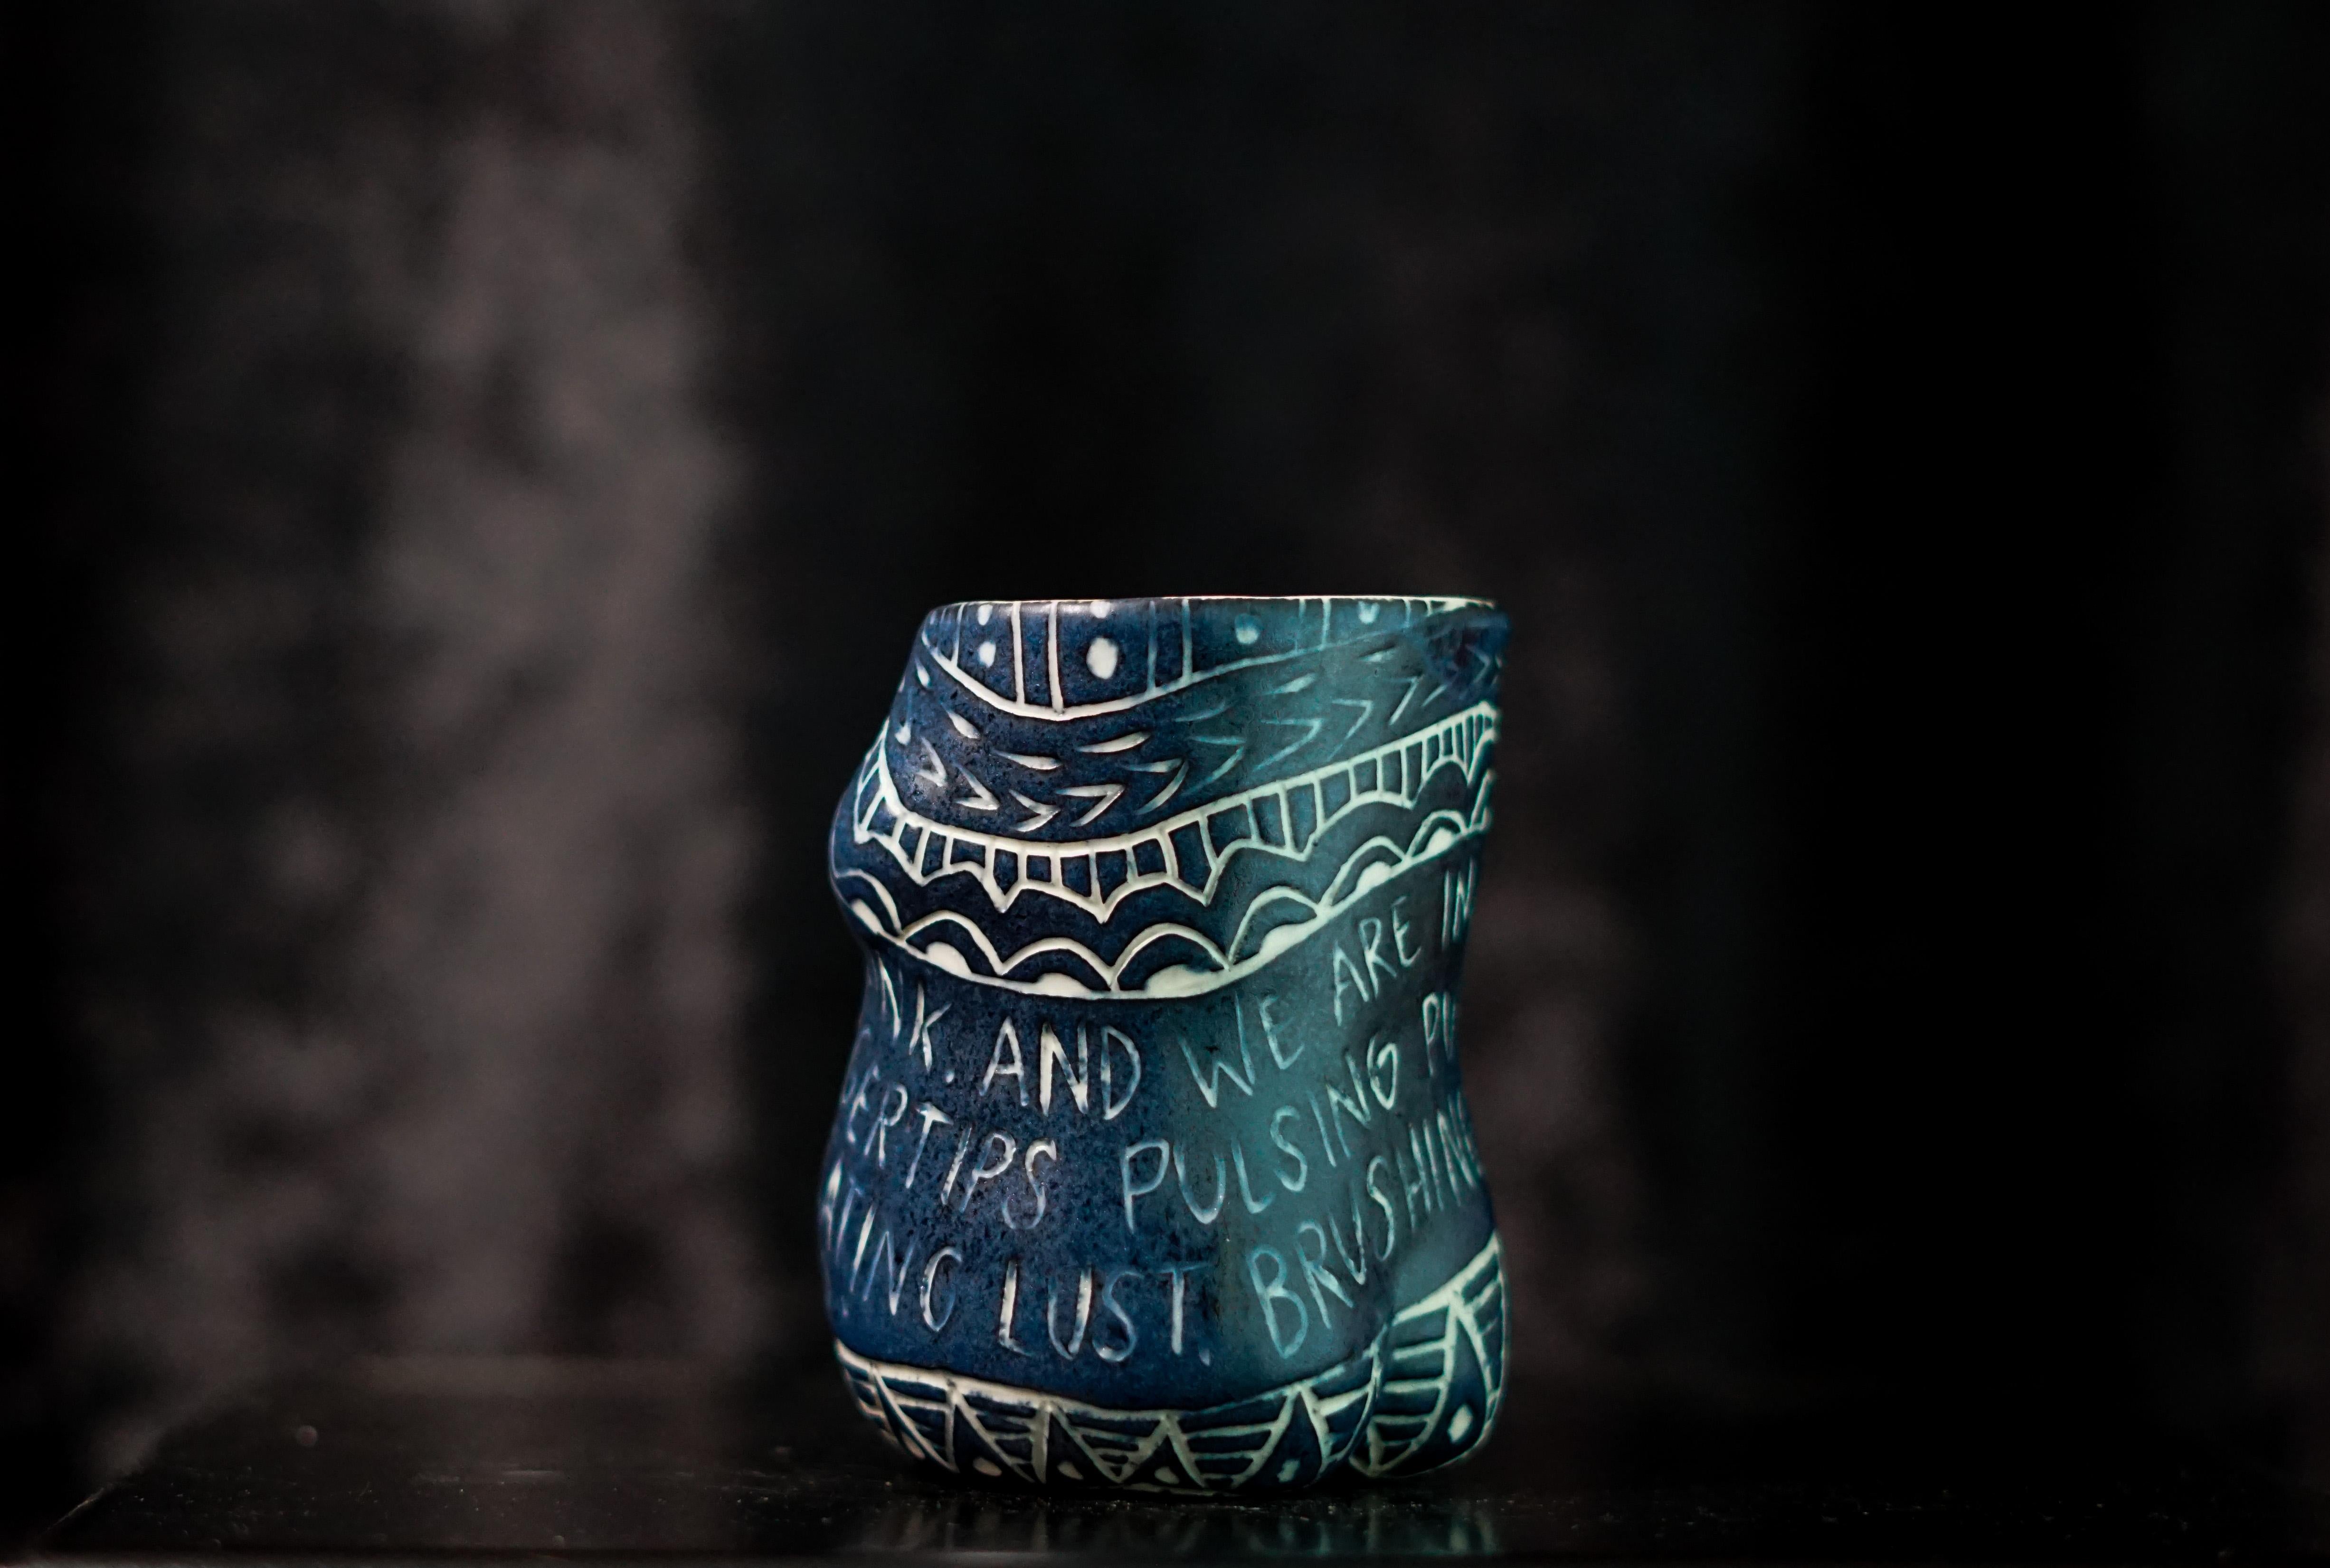 “And You Blink..” Porcelain cup with sgraffito detailing by the artist - Modern Sculpture by Alex Hodge